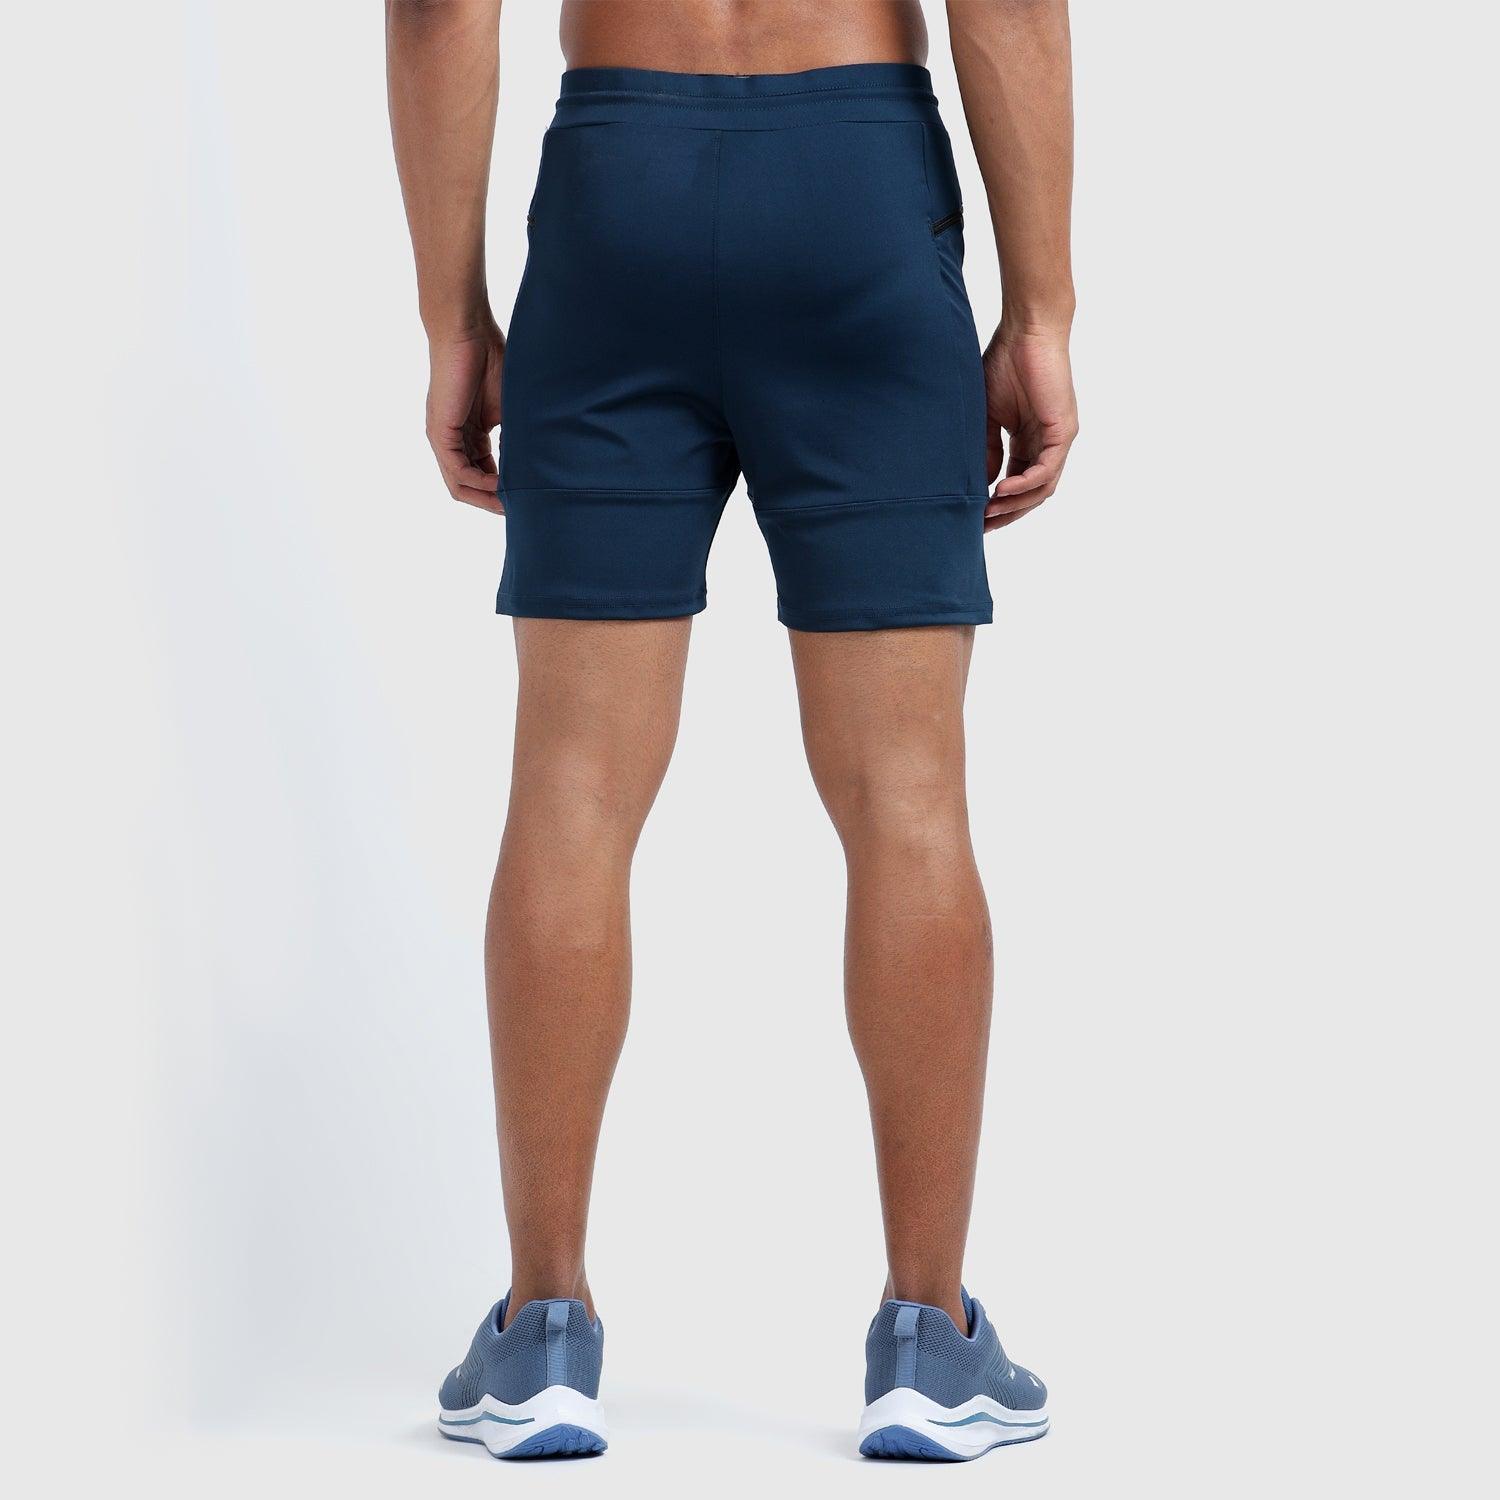 Denmonk's fashionable Power Shorts regal blue shorts for men will boost your level of gym fitness.